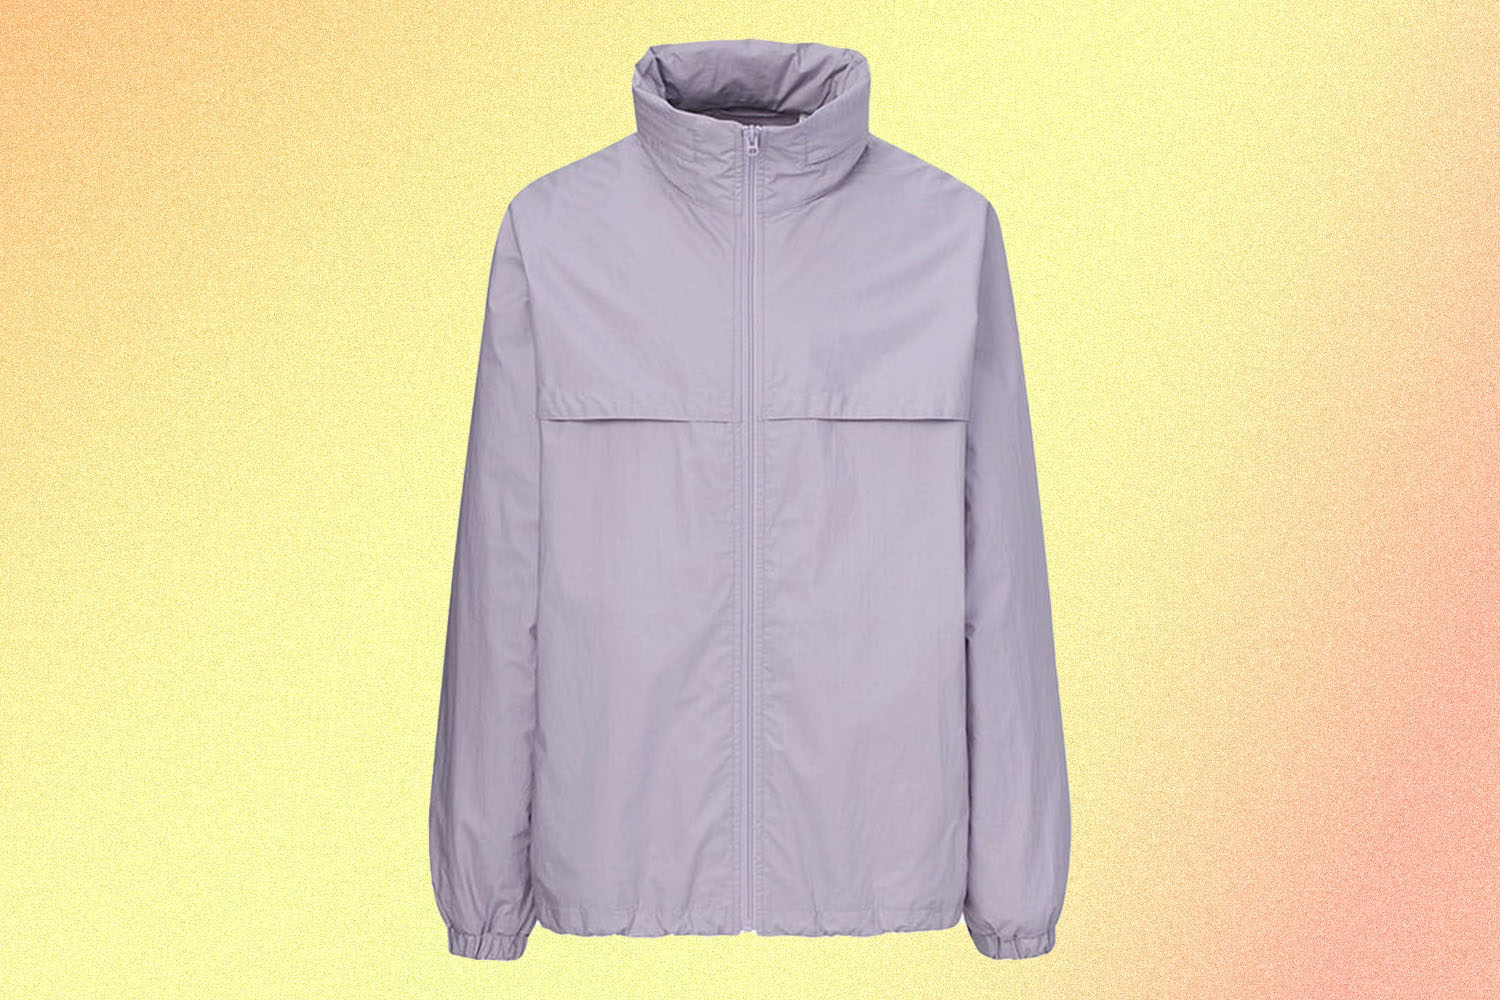 a lavender blouson jacket on a yellow background